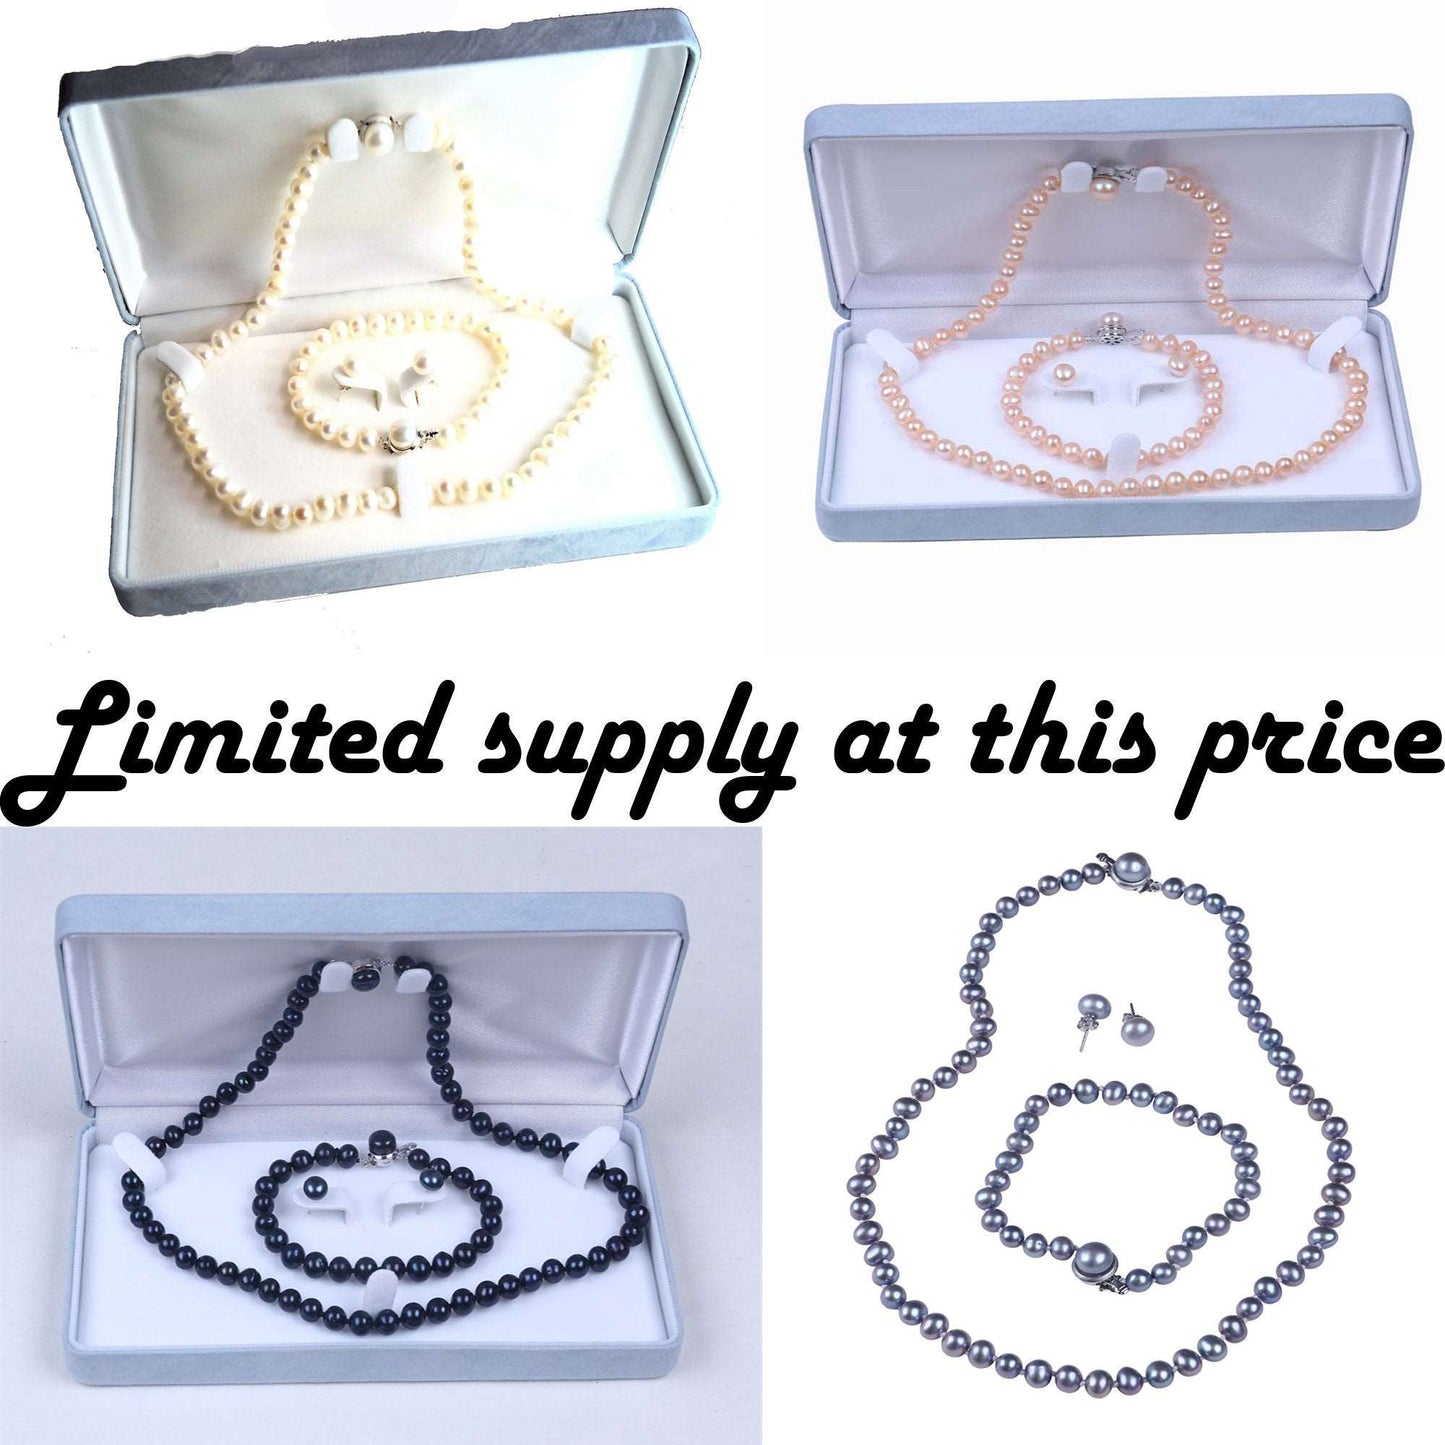 Excellent quality 3 piece freshwater pearl set in elegant gift box - Providence silver gold jewelry usa